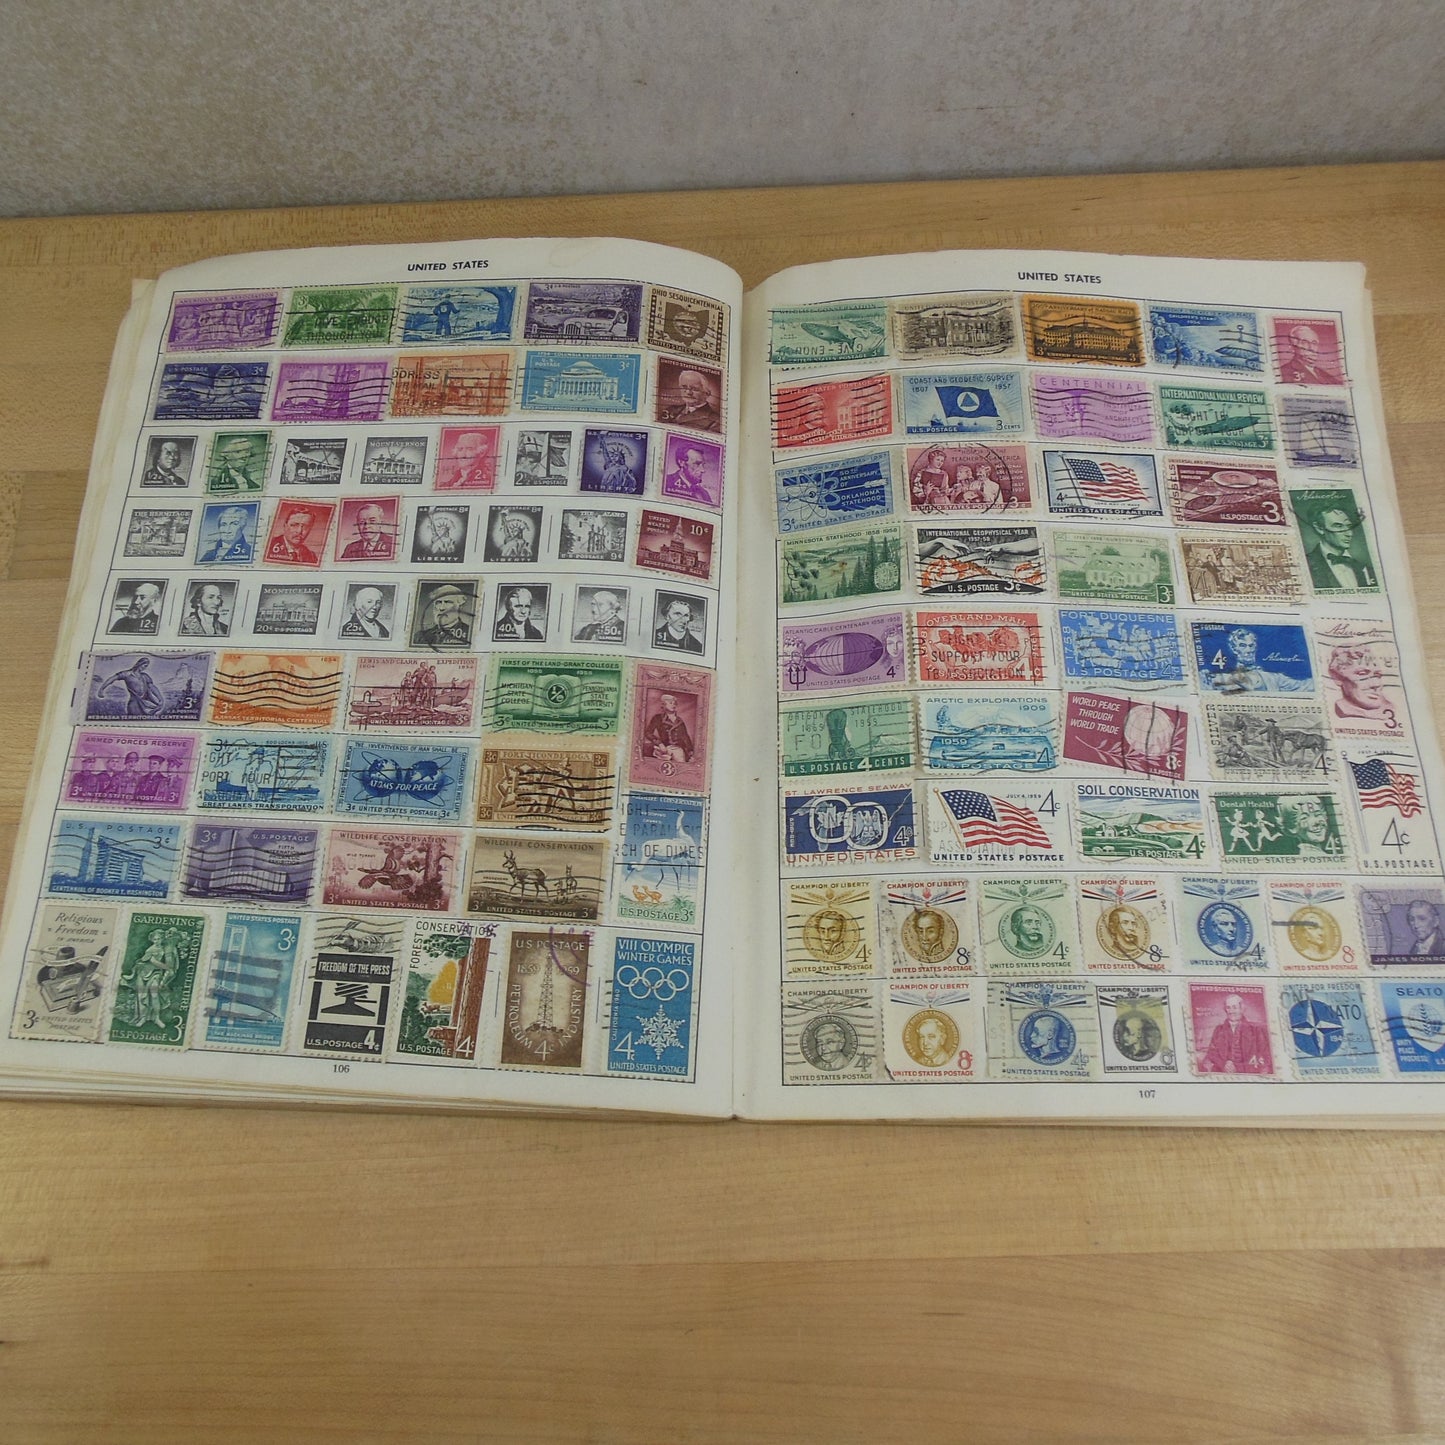 Explorer World Stamp Collector Album 1960 - Partially Filled Unresearched Collection